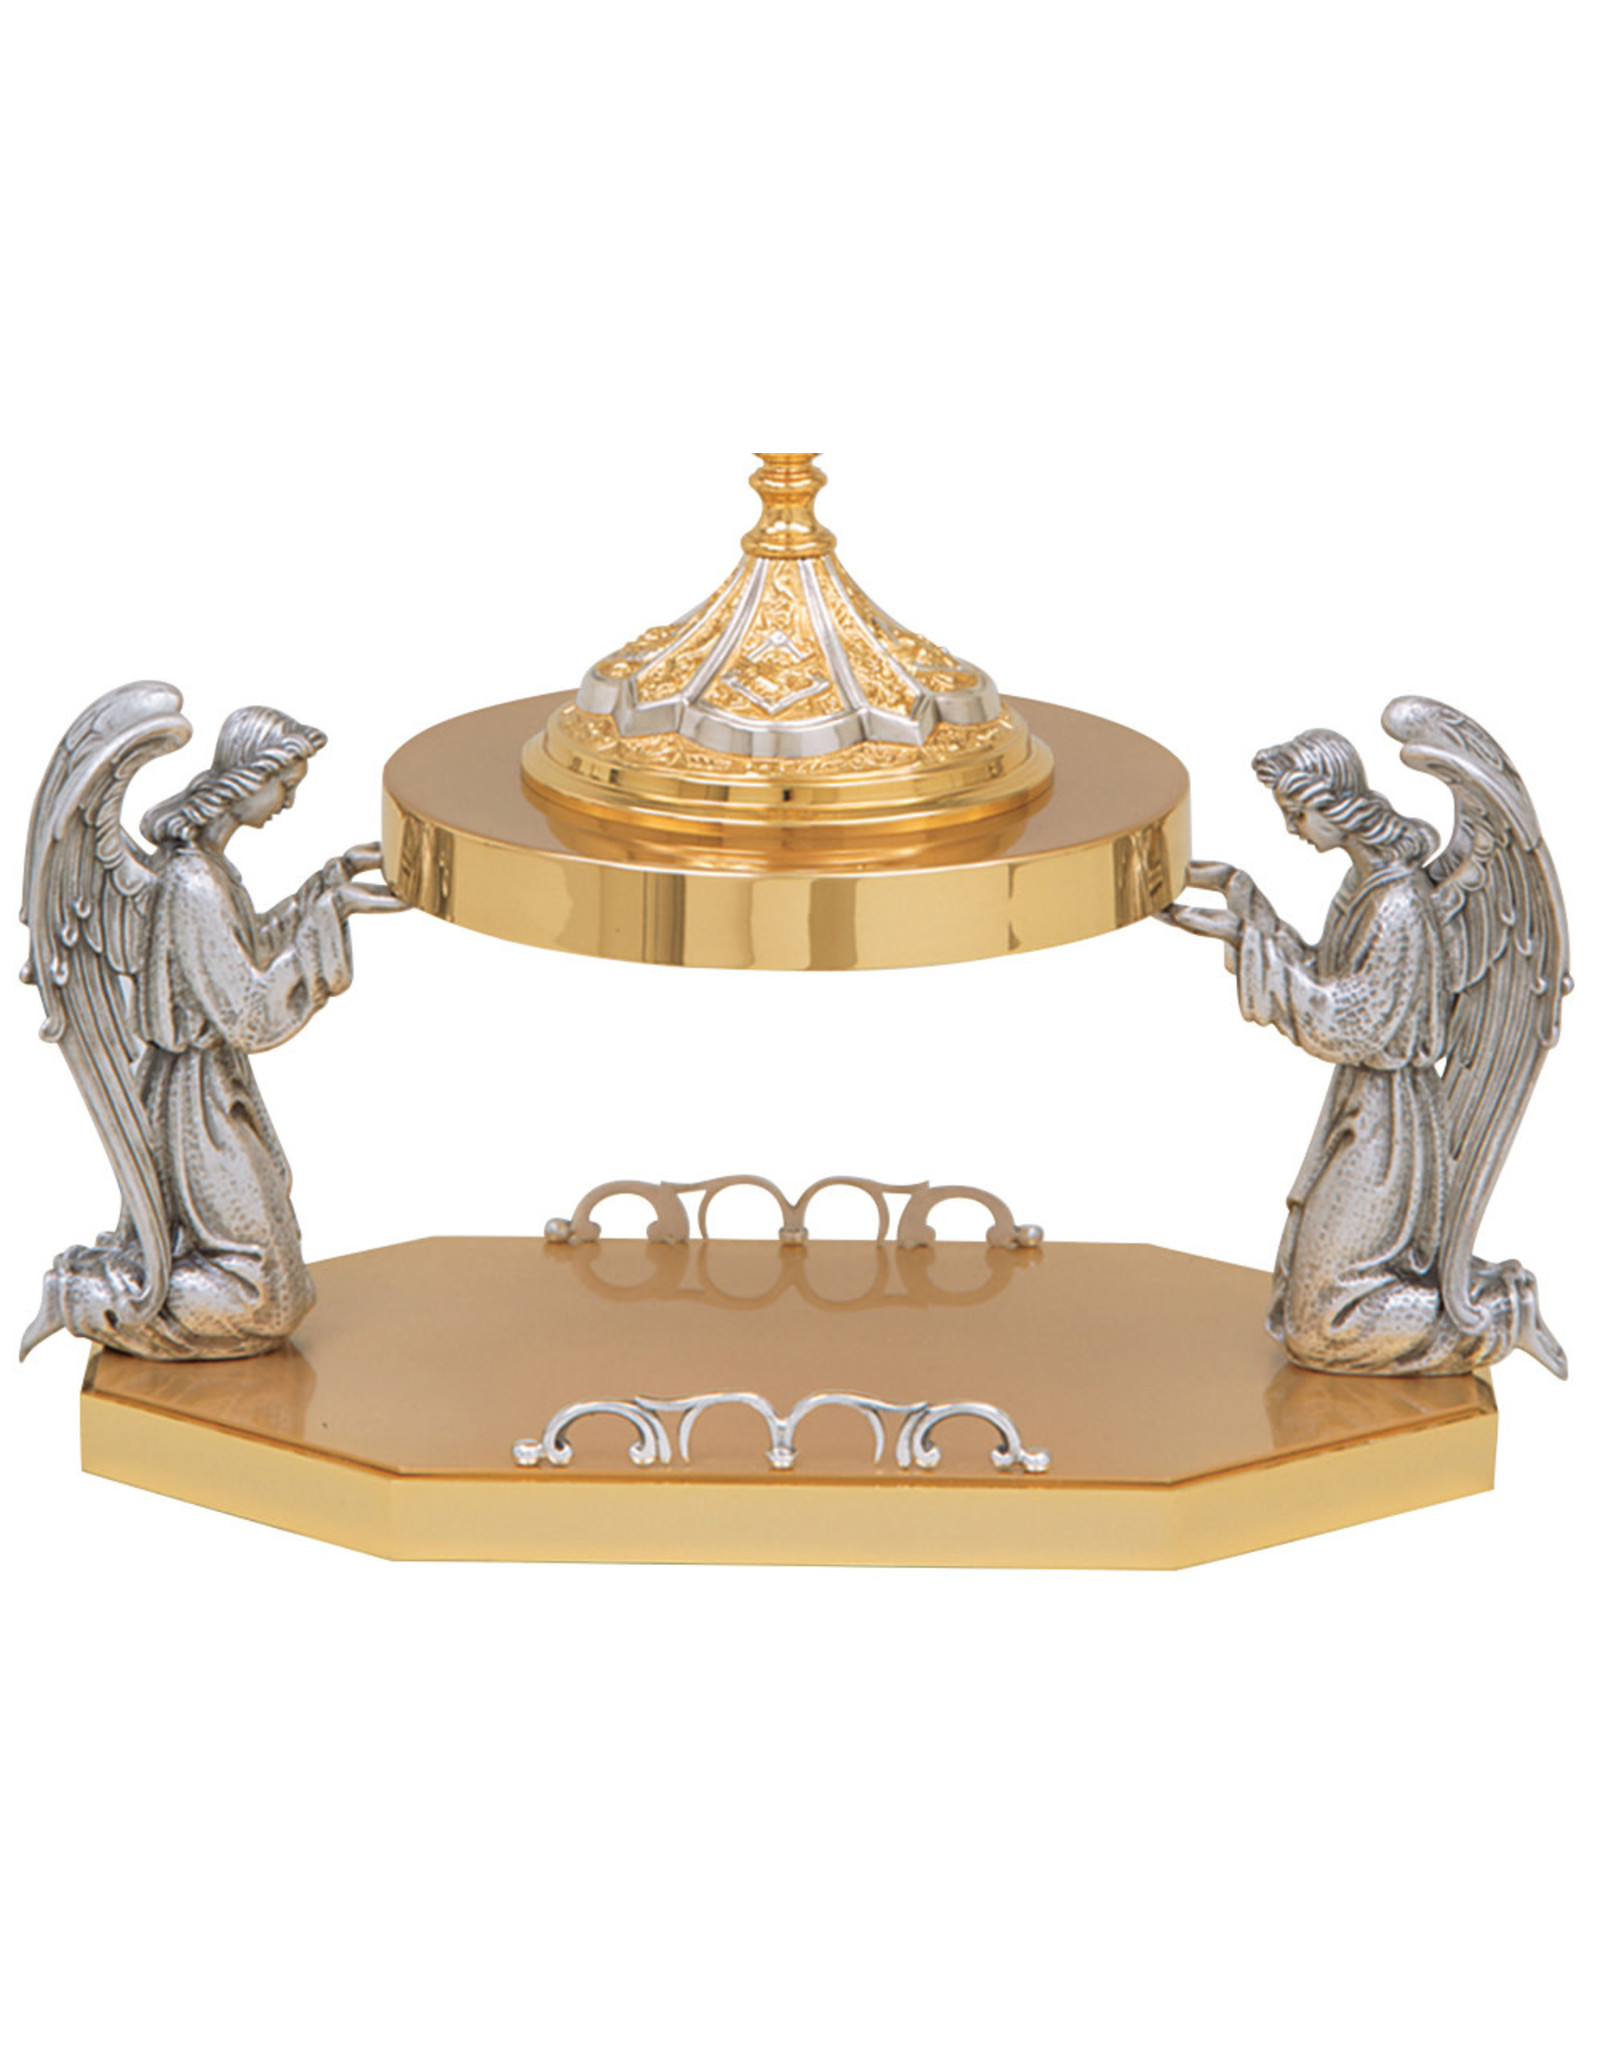 Koleys Thabor (Pedestal) - Gold Plated with Silver Adoring Angels